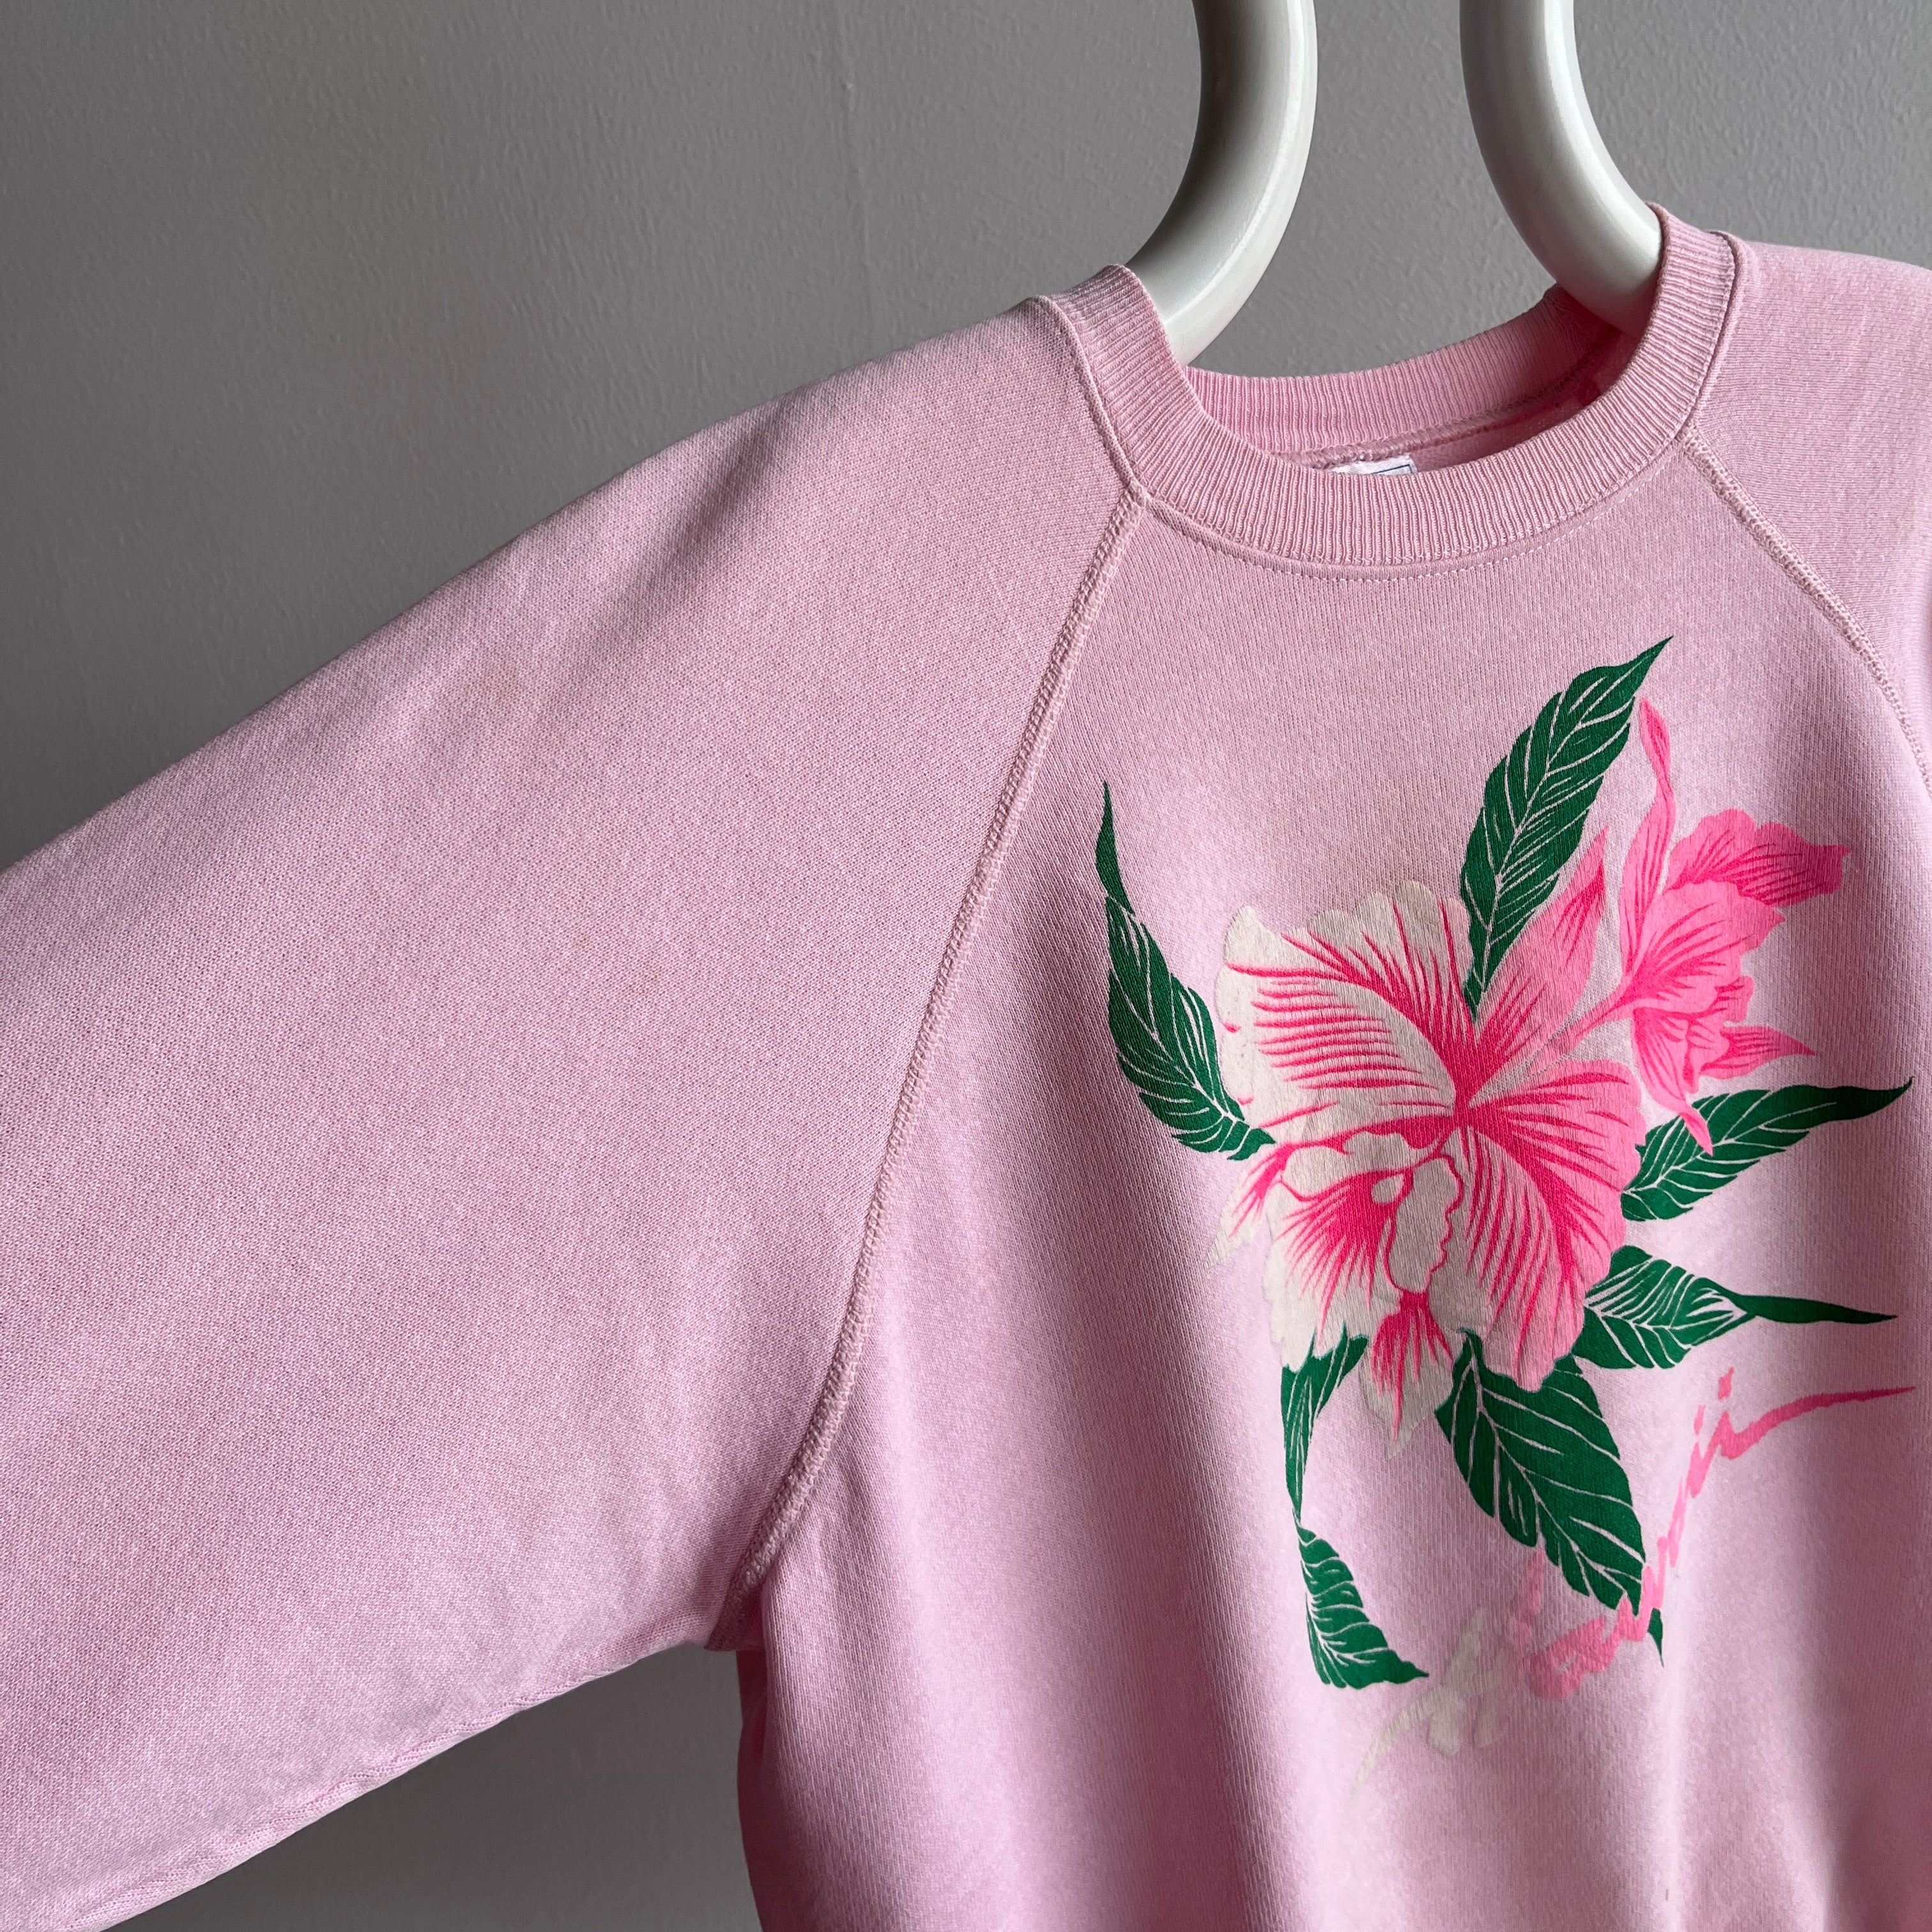 1980s Hawaii Thinned Out and Mended and Thinned Out Some More Sweatshirt - Thrashed